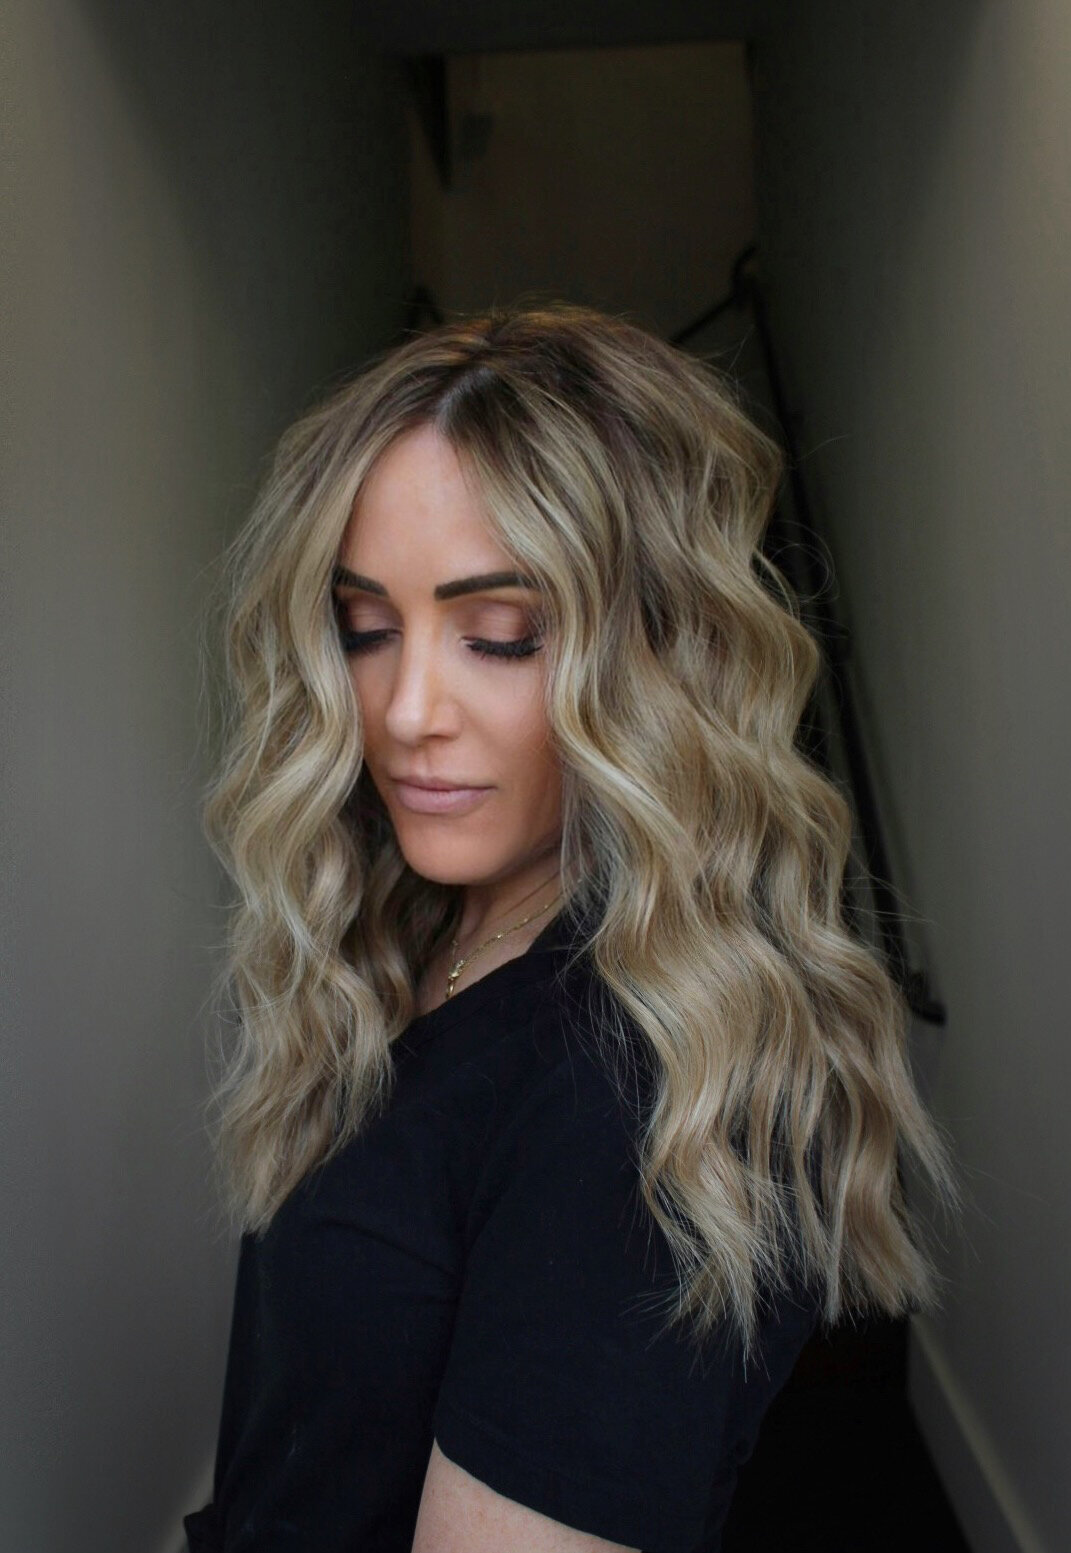 Side profile of a woman with ash blonde wavy hair